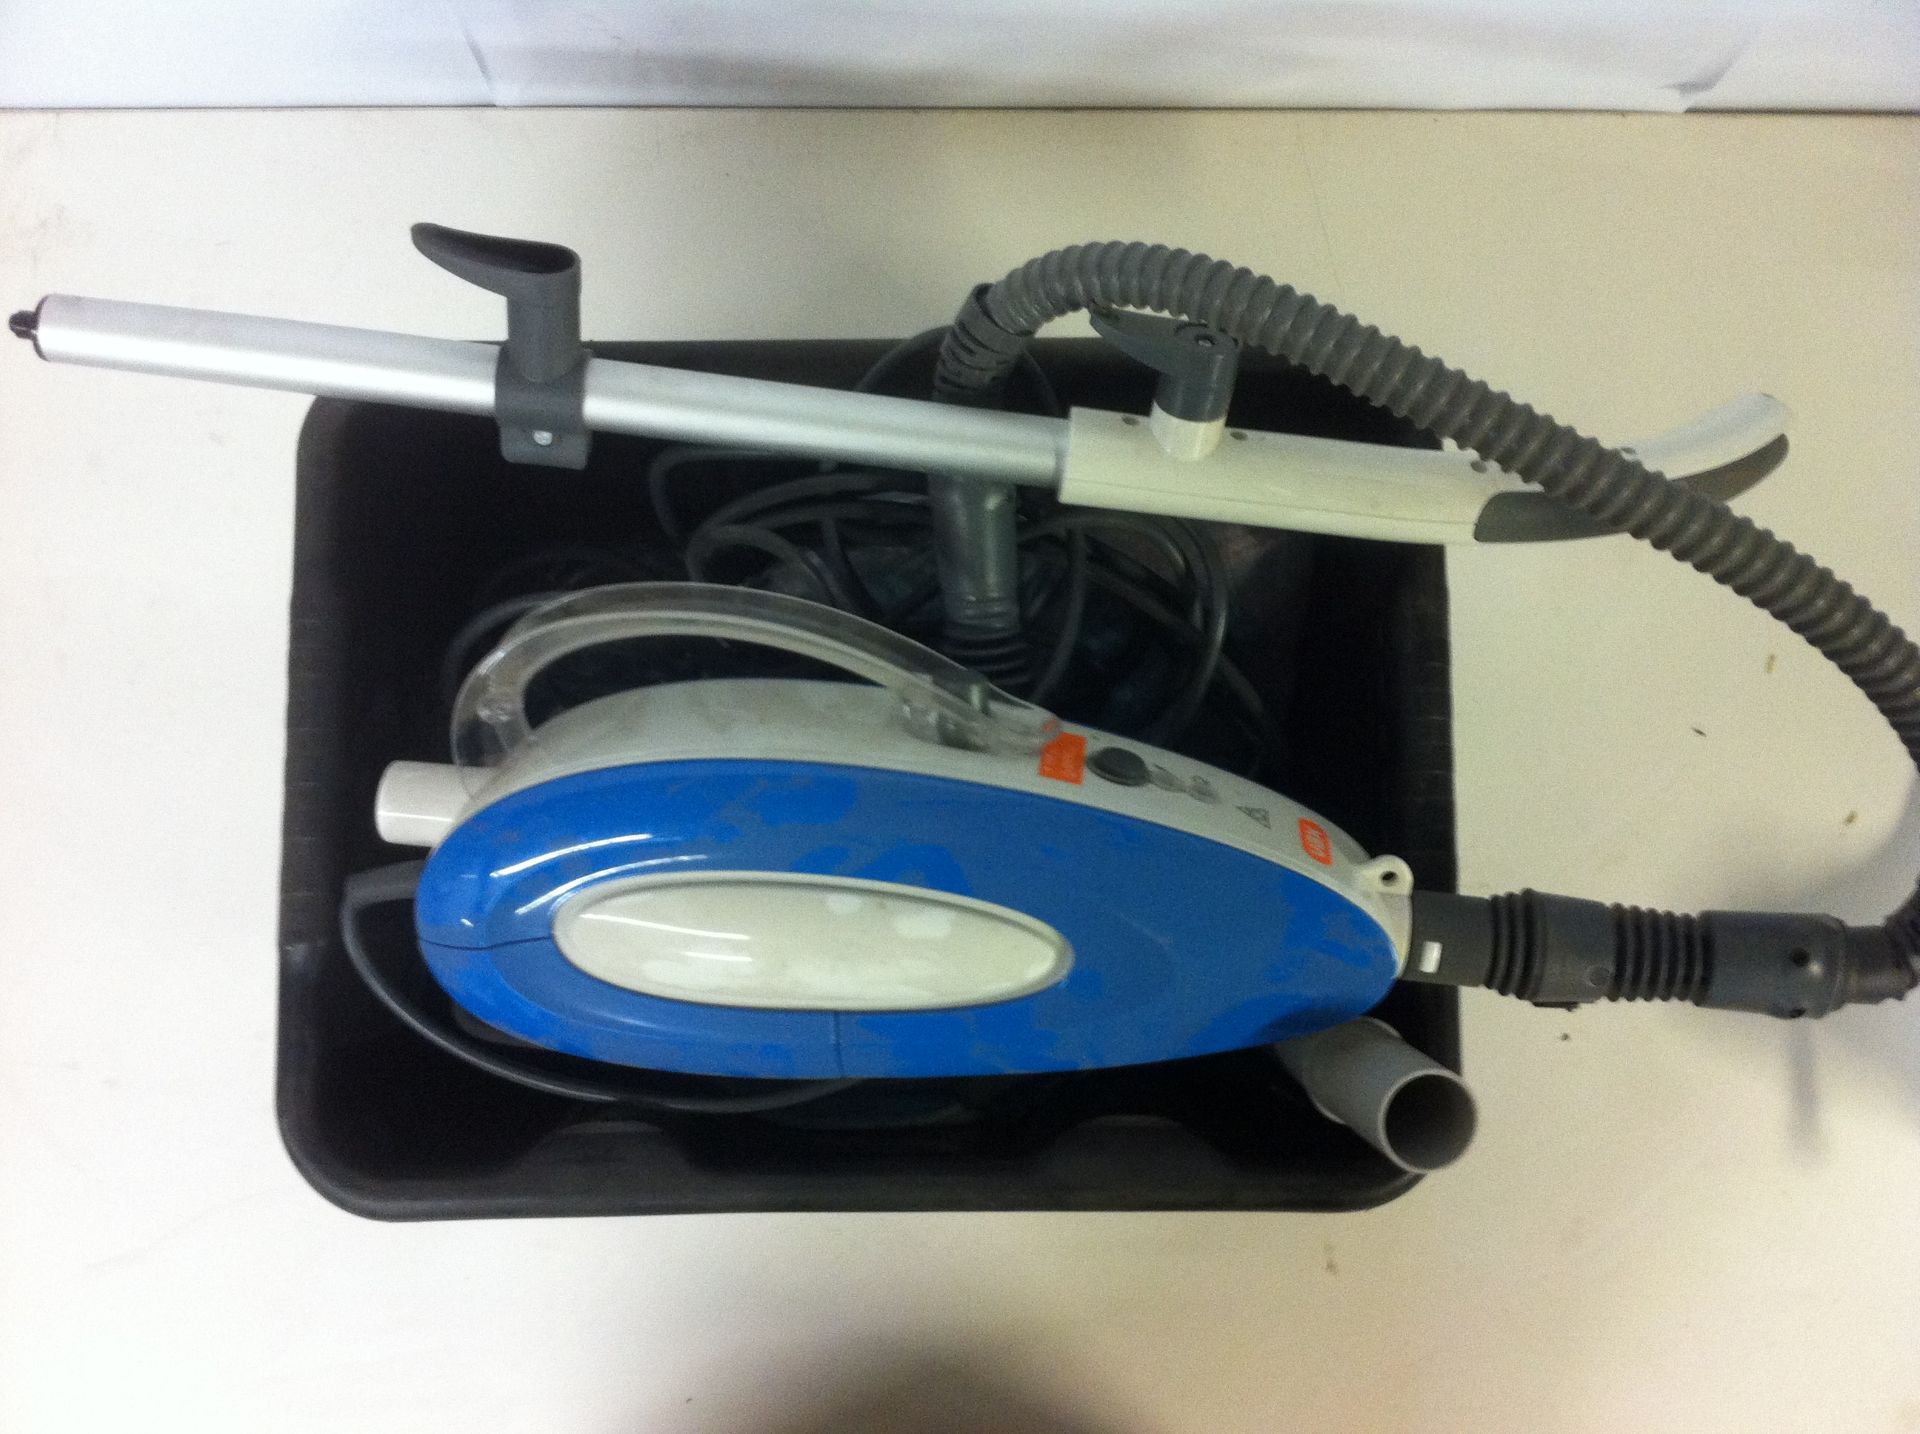 Vax steam cleaner with attachments